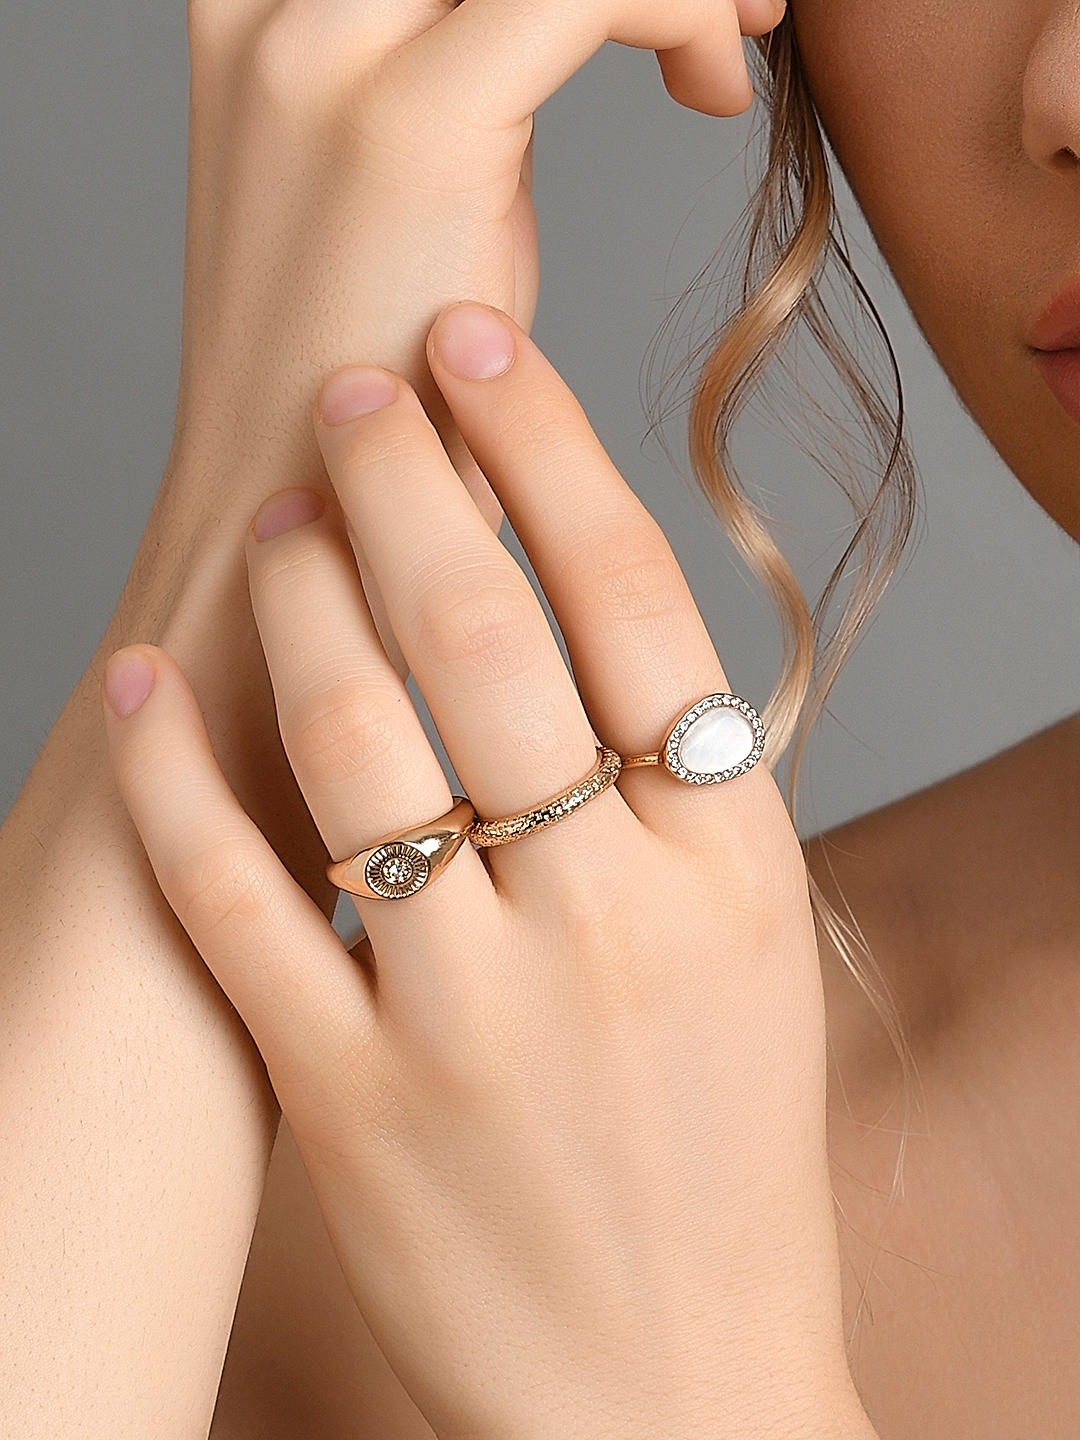 Infinity Link Friendship Ring In Silver Or Gold Vermeil By Holly Blake |  notonthehighstreet.com